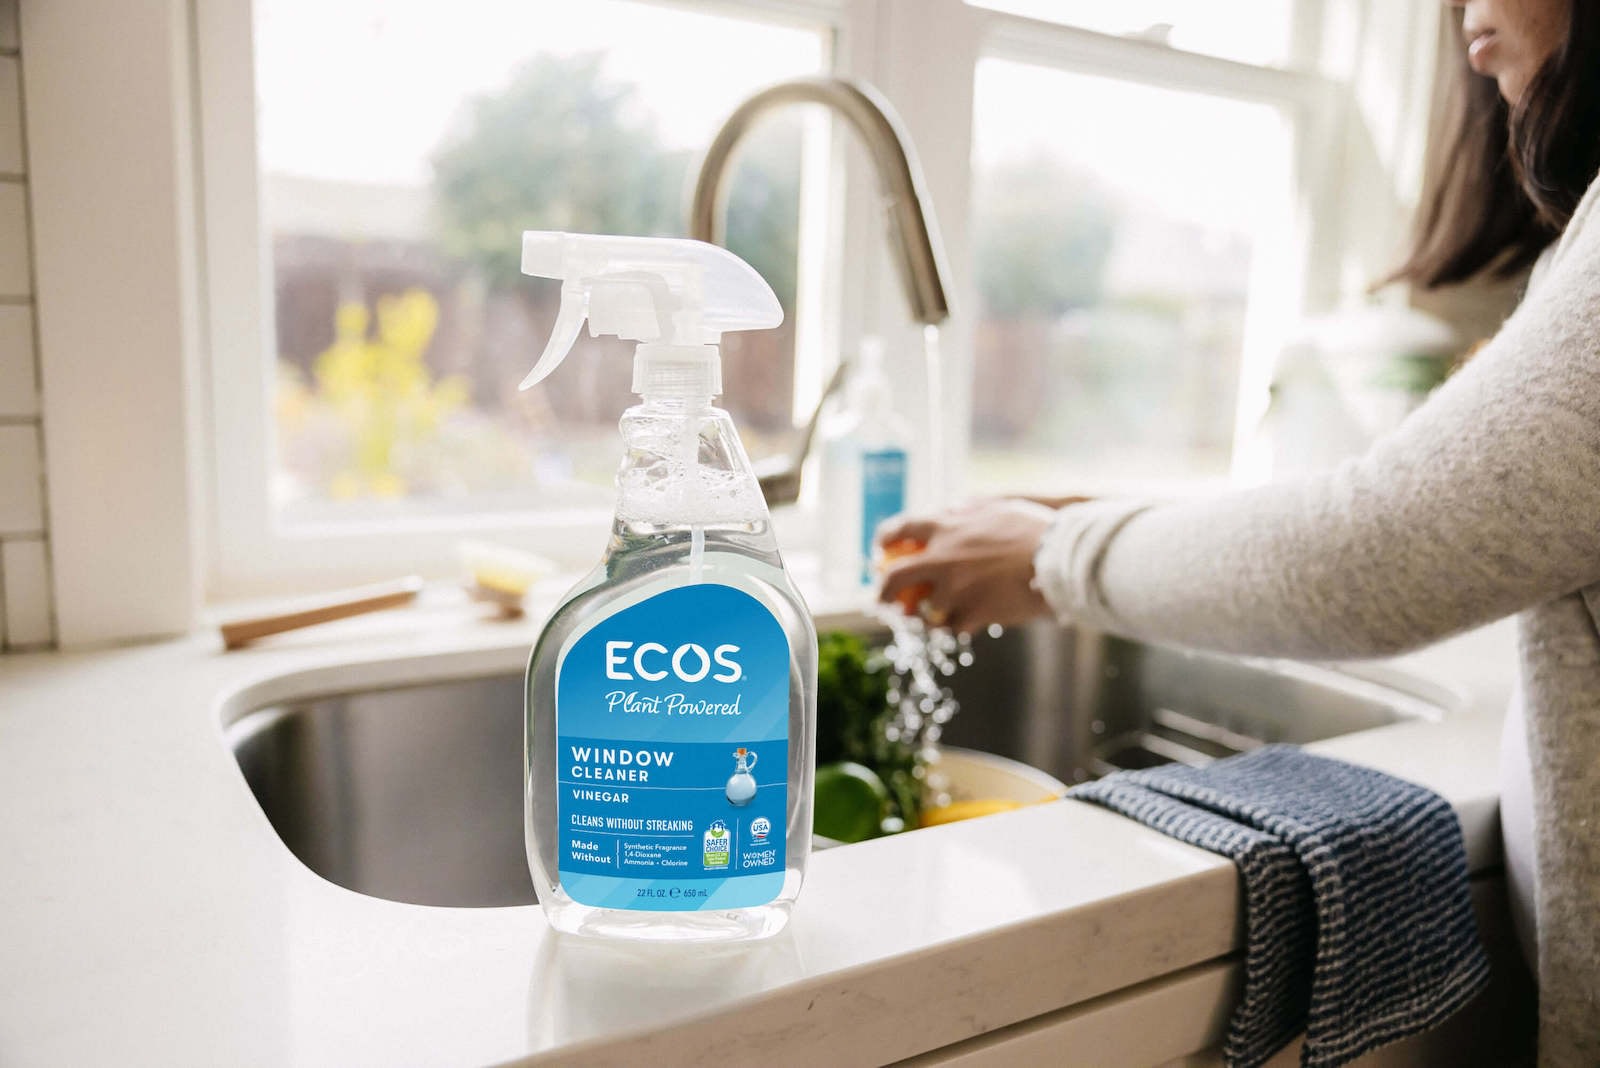 Try Our Eco-Conscious Window & Glass Cleaner Powered By Vinegar